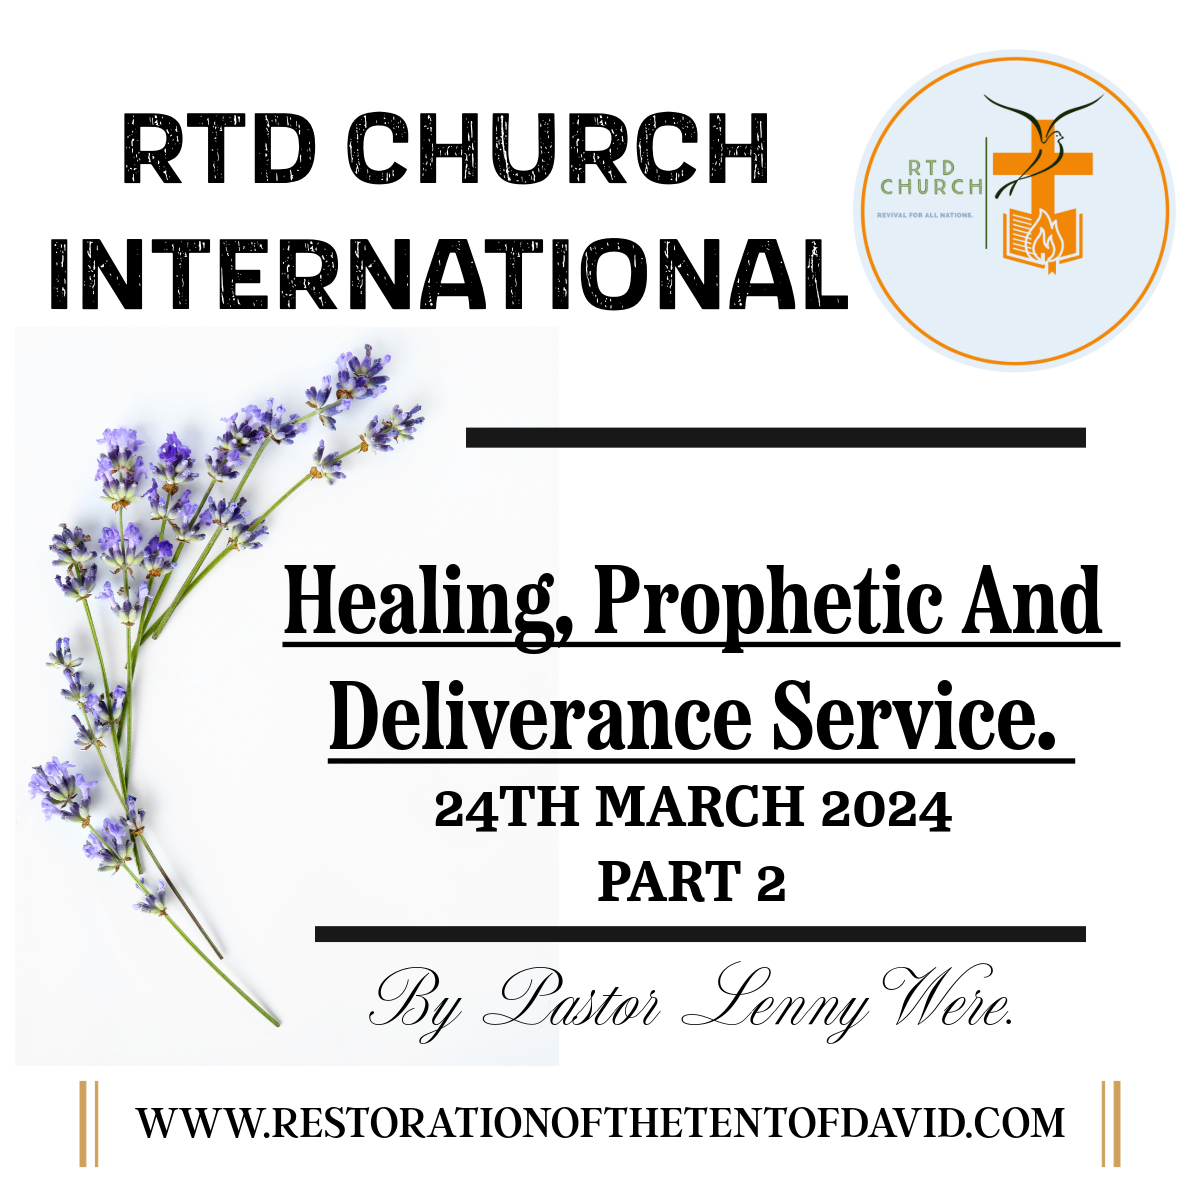 HEALING, PROPHETIC AND DELIVERANCE SERVICE. 24TH FEBRUARY 2024. PART 2.